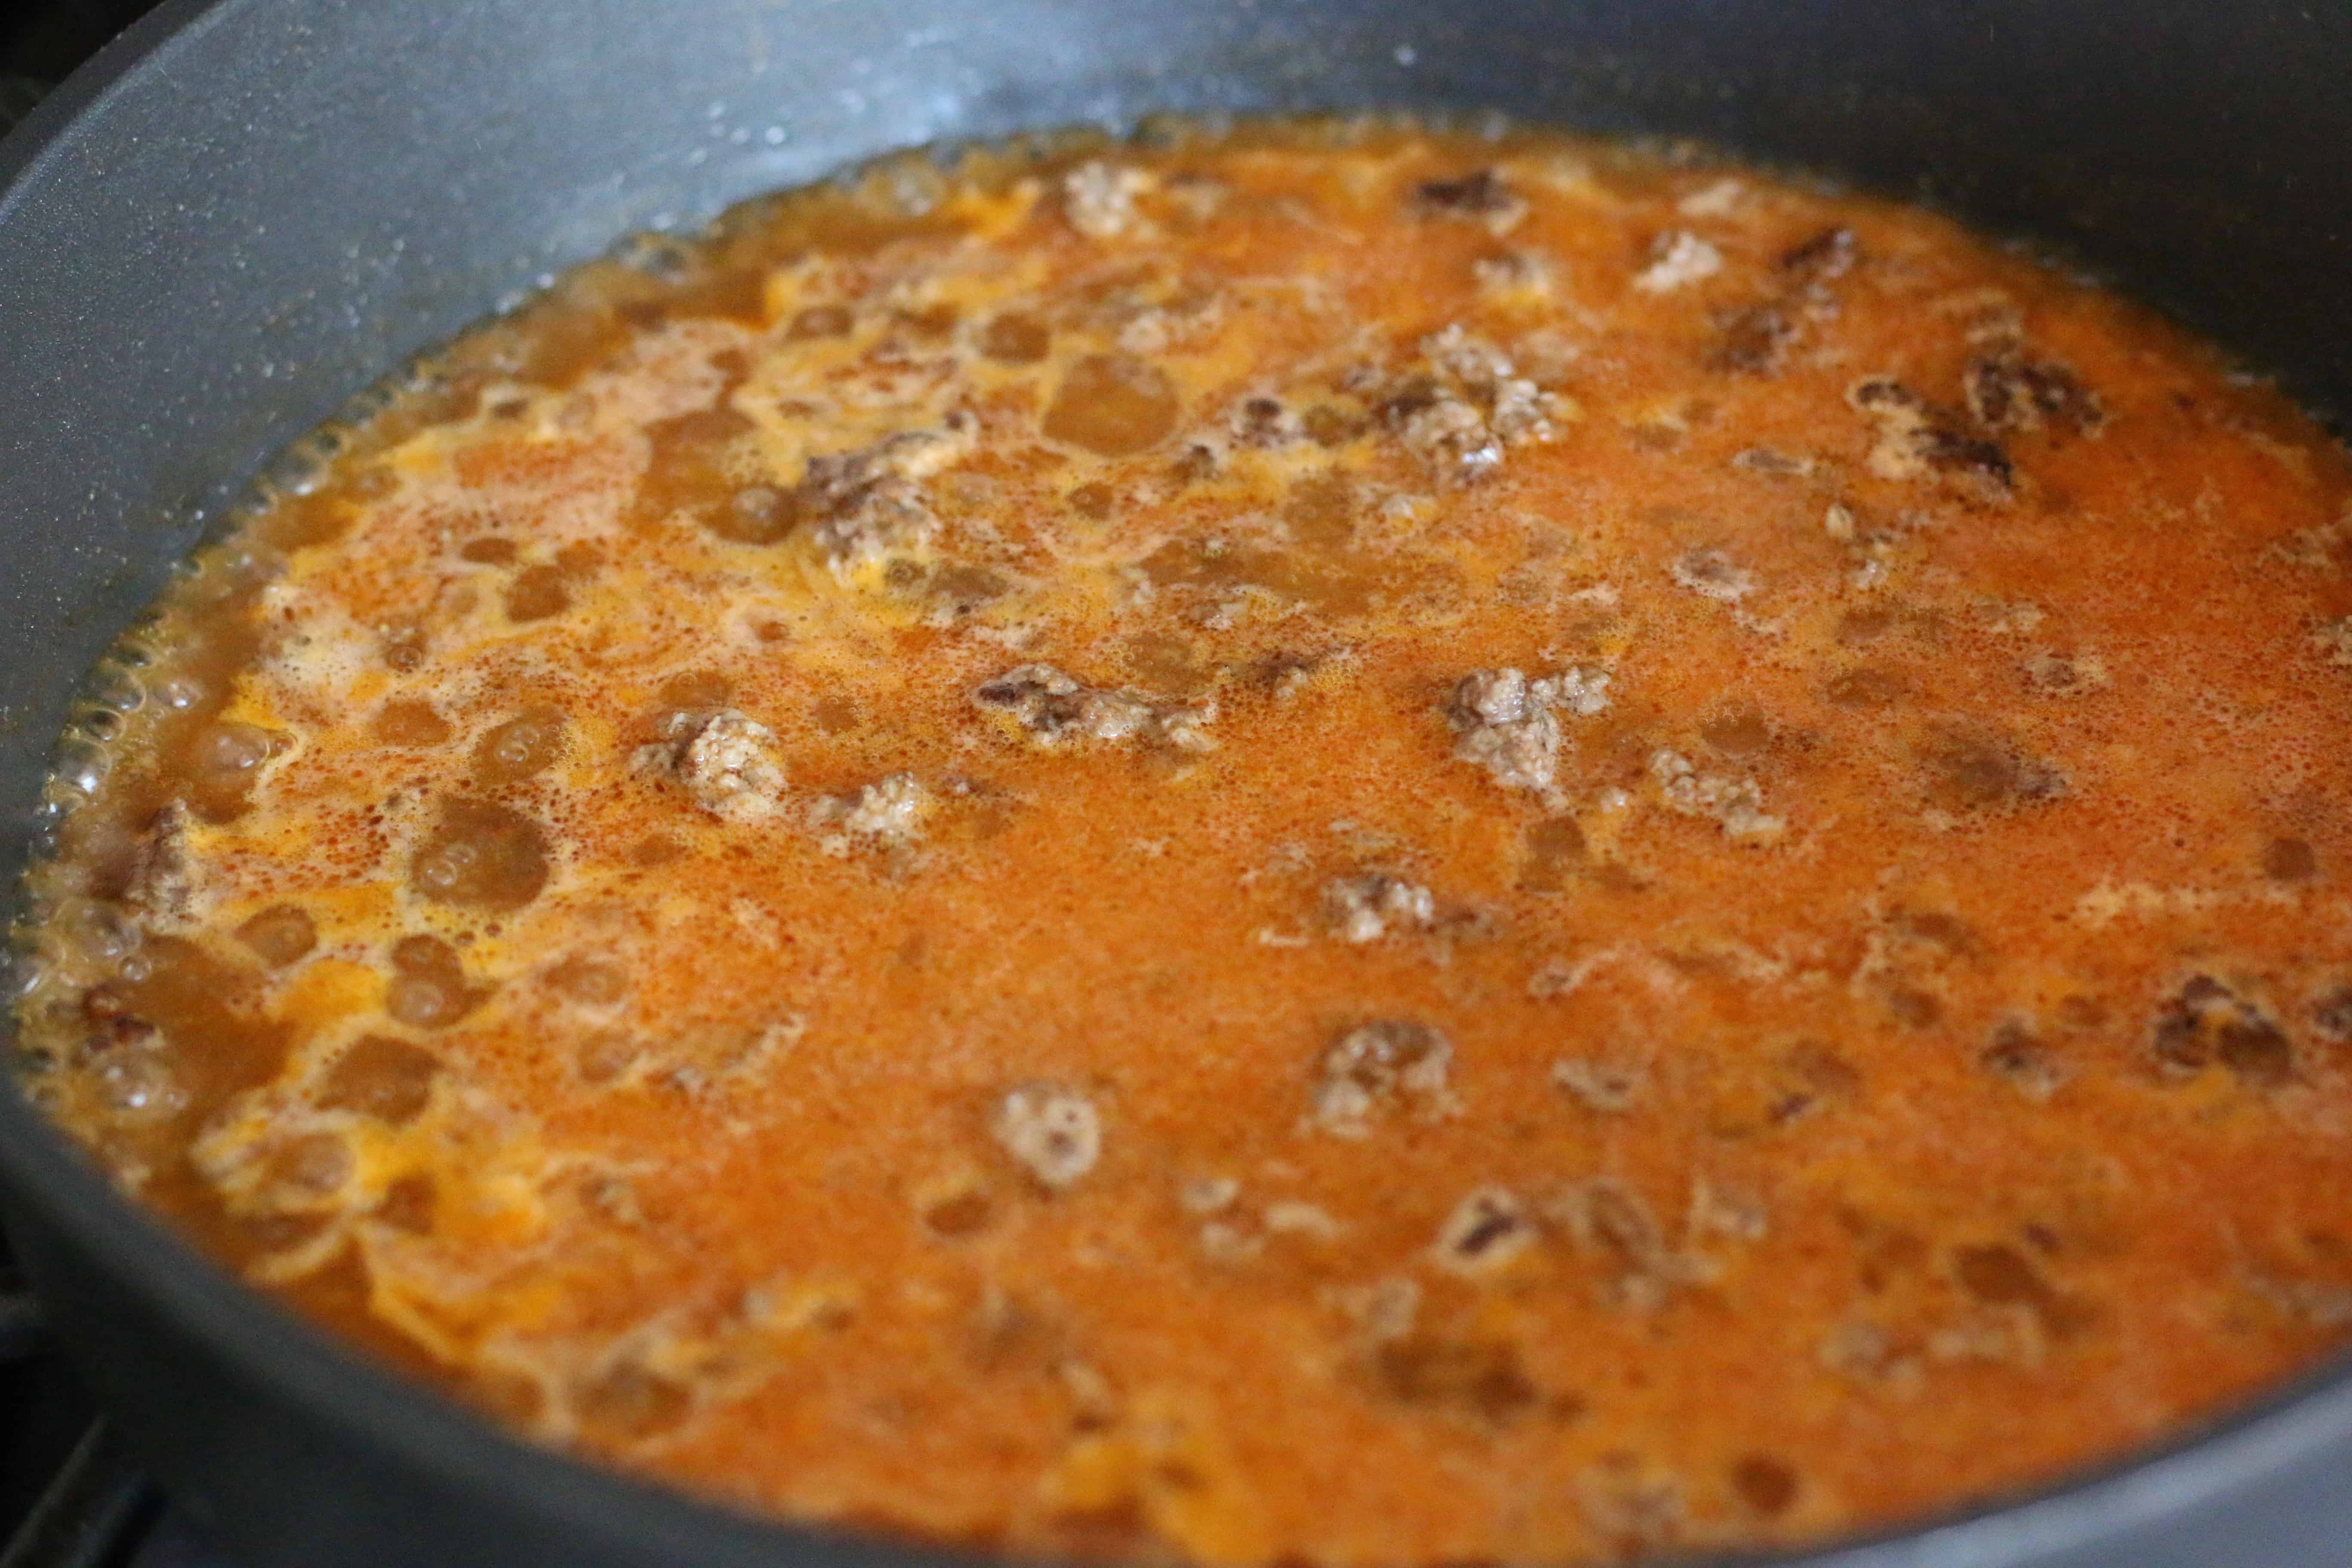 cooked ground beef, water and taco seasoning in a large skillet coming to a rolling boil.